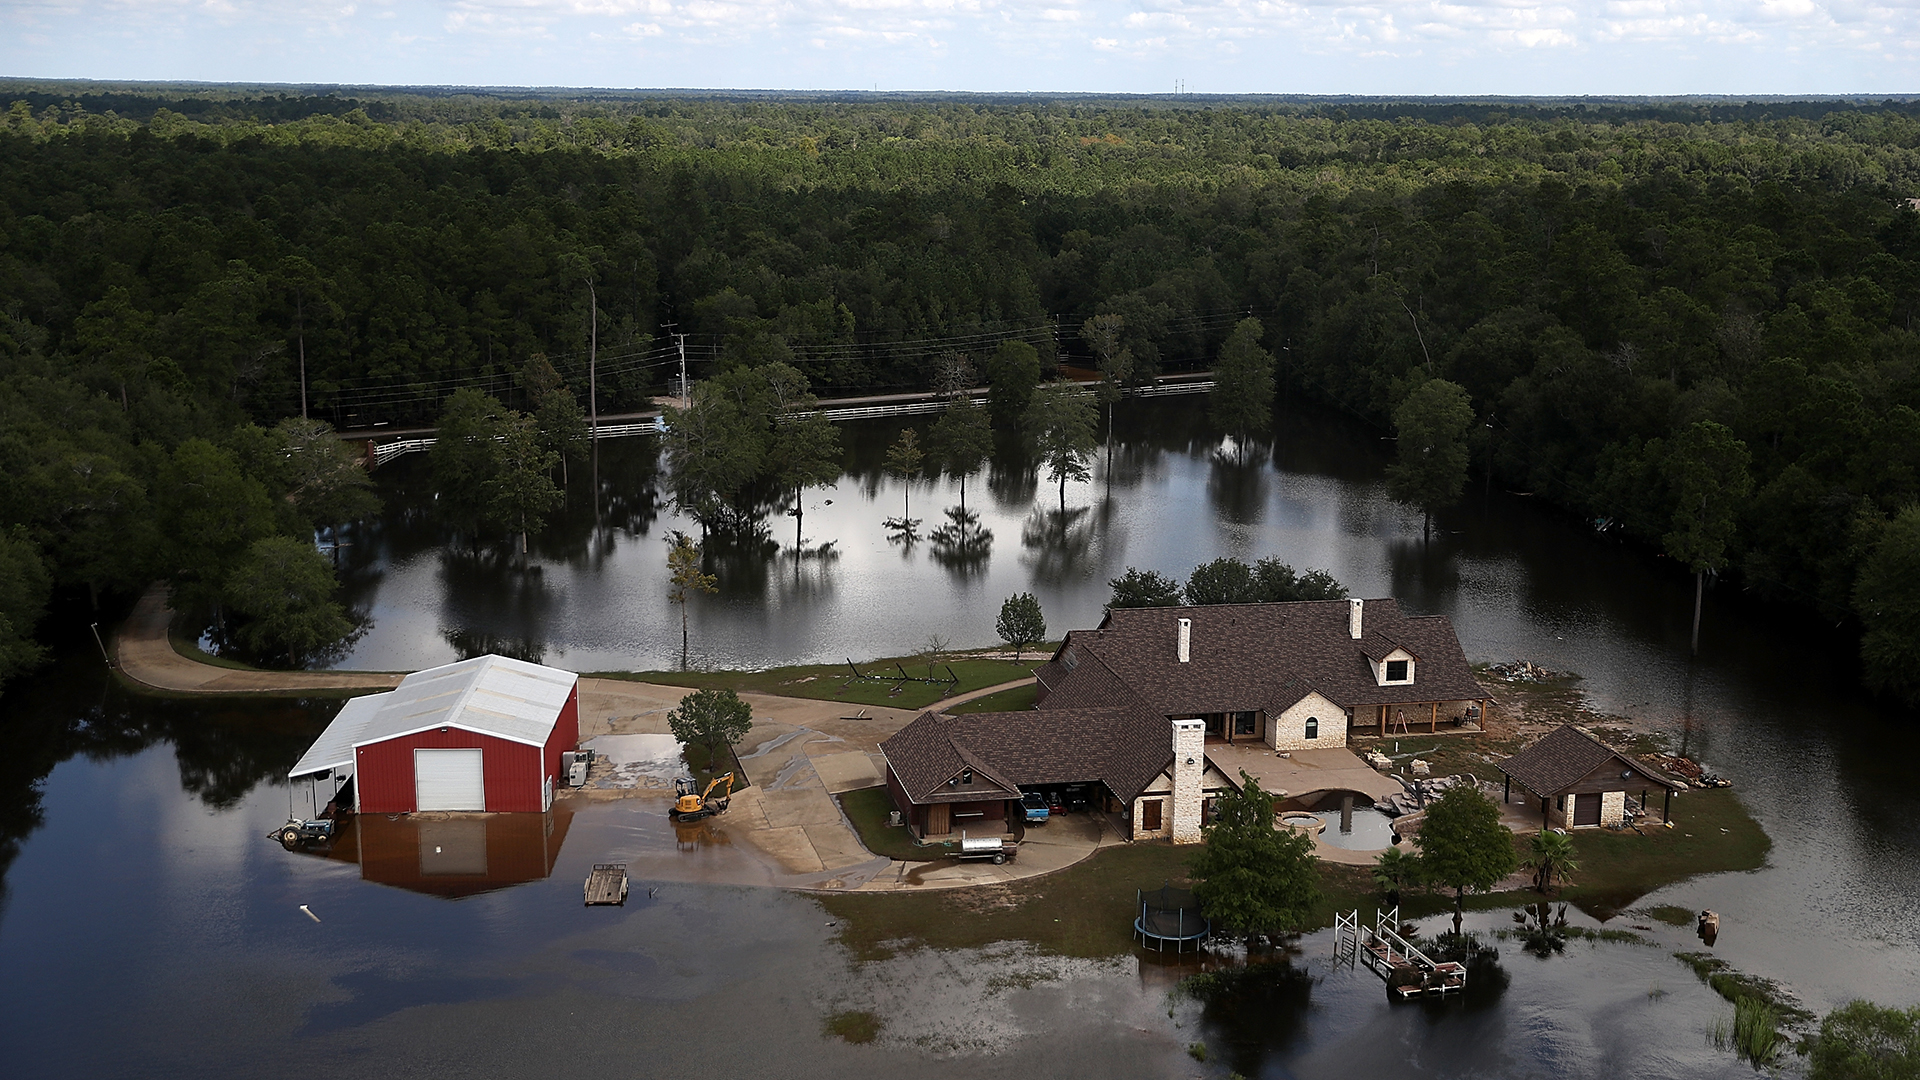 A home near Beaumont, Texas surrounded by flood waters on September 5, 2017 following Hurricane Harvey.